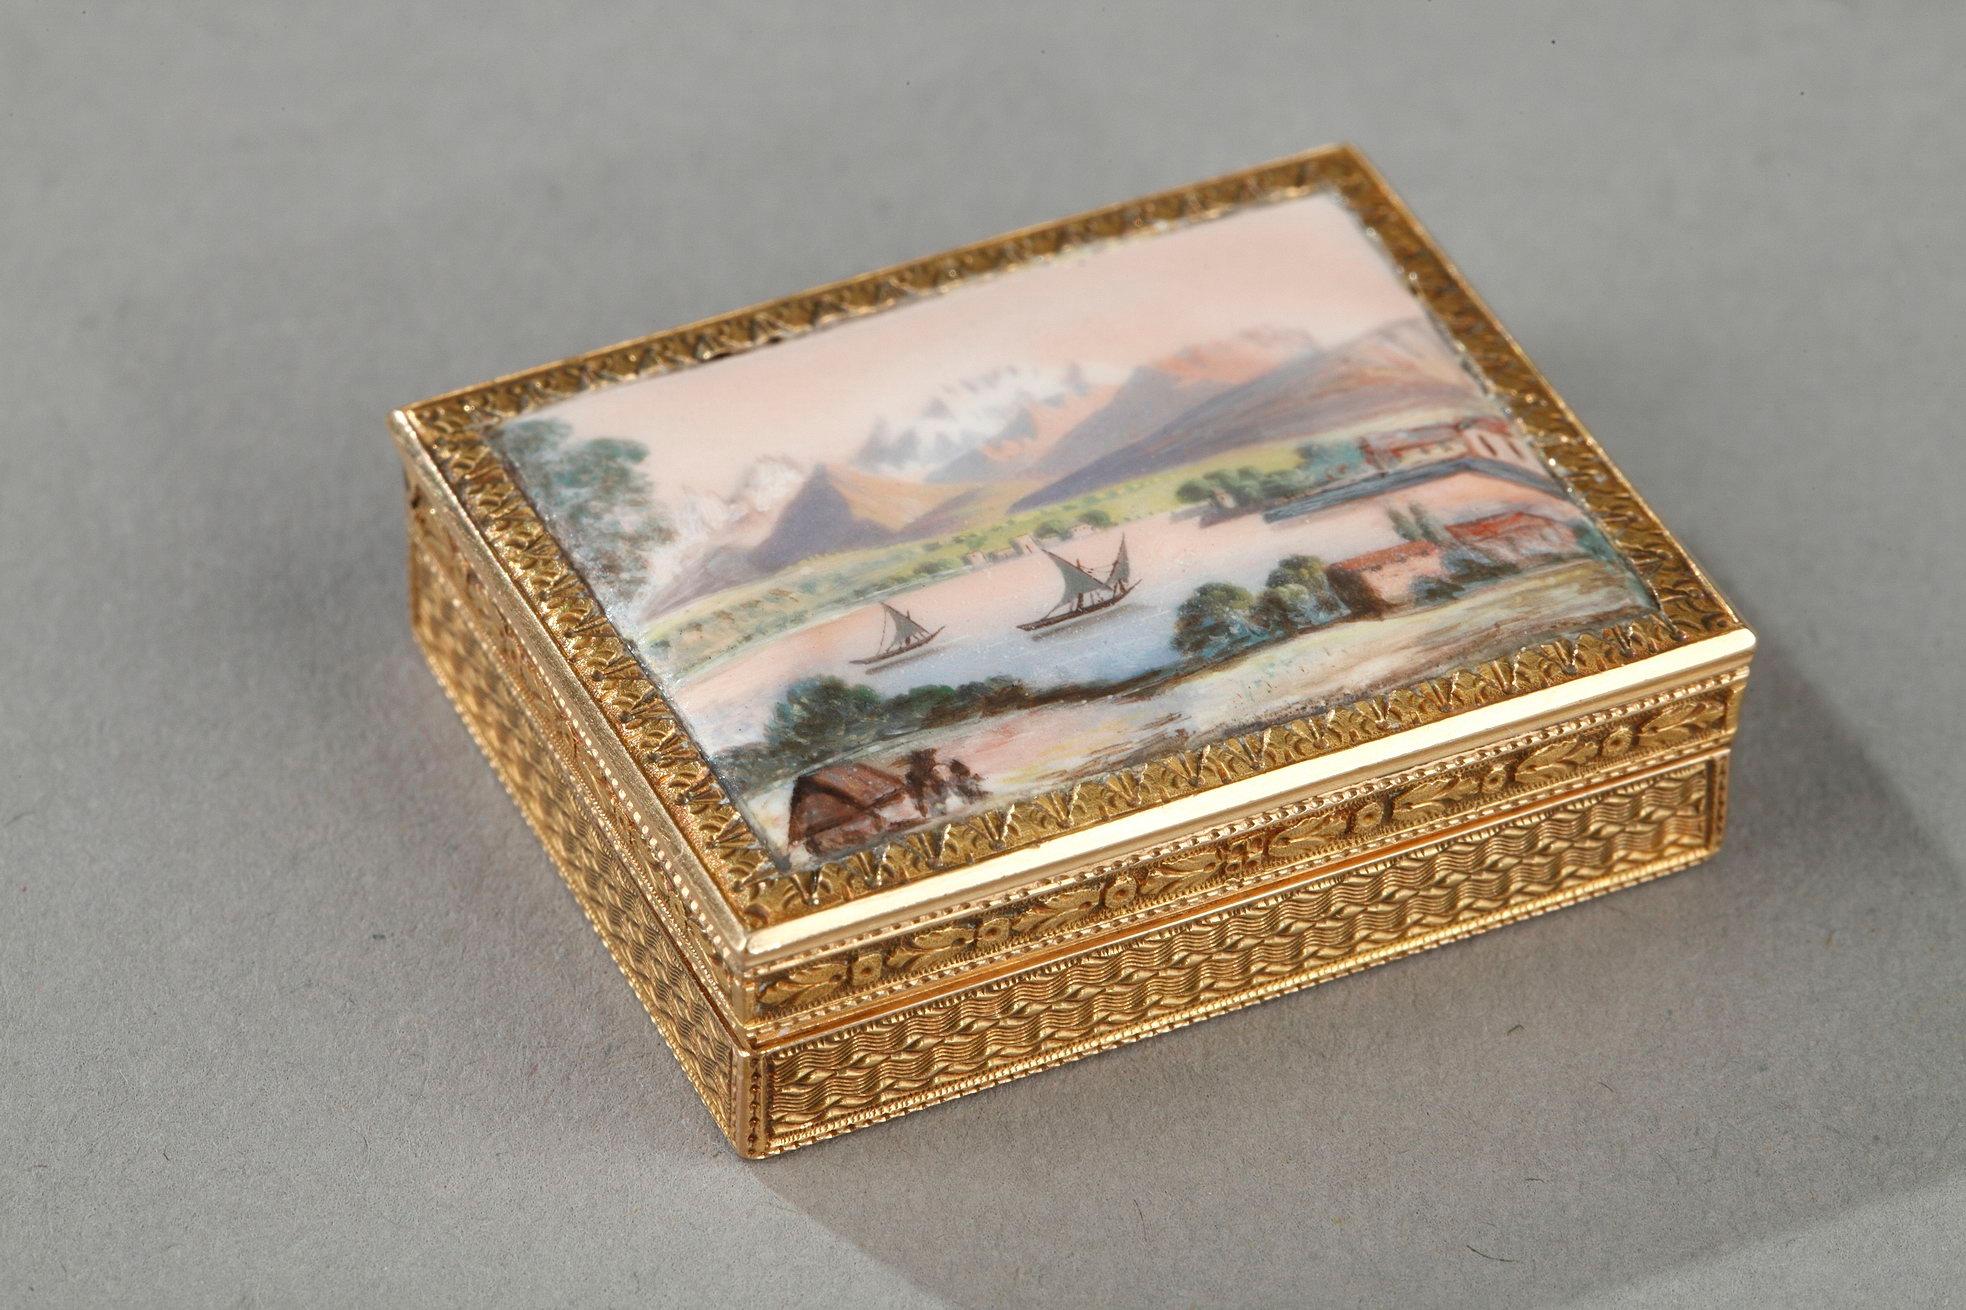 Rectangular, enameled gold vinaigrette. The hinged lid is decorated with enamel on gold and displays a view of an Alpine lake in front of a mountain range. The sides of the vinaigrette are embellished with finely etched waves and framed in a floral